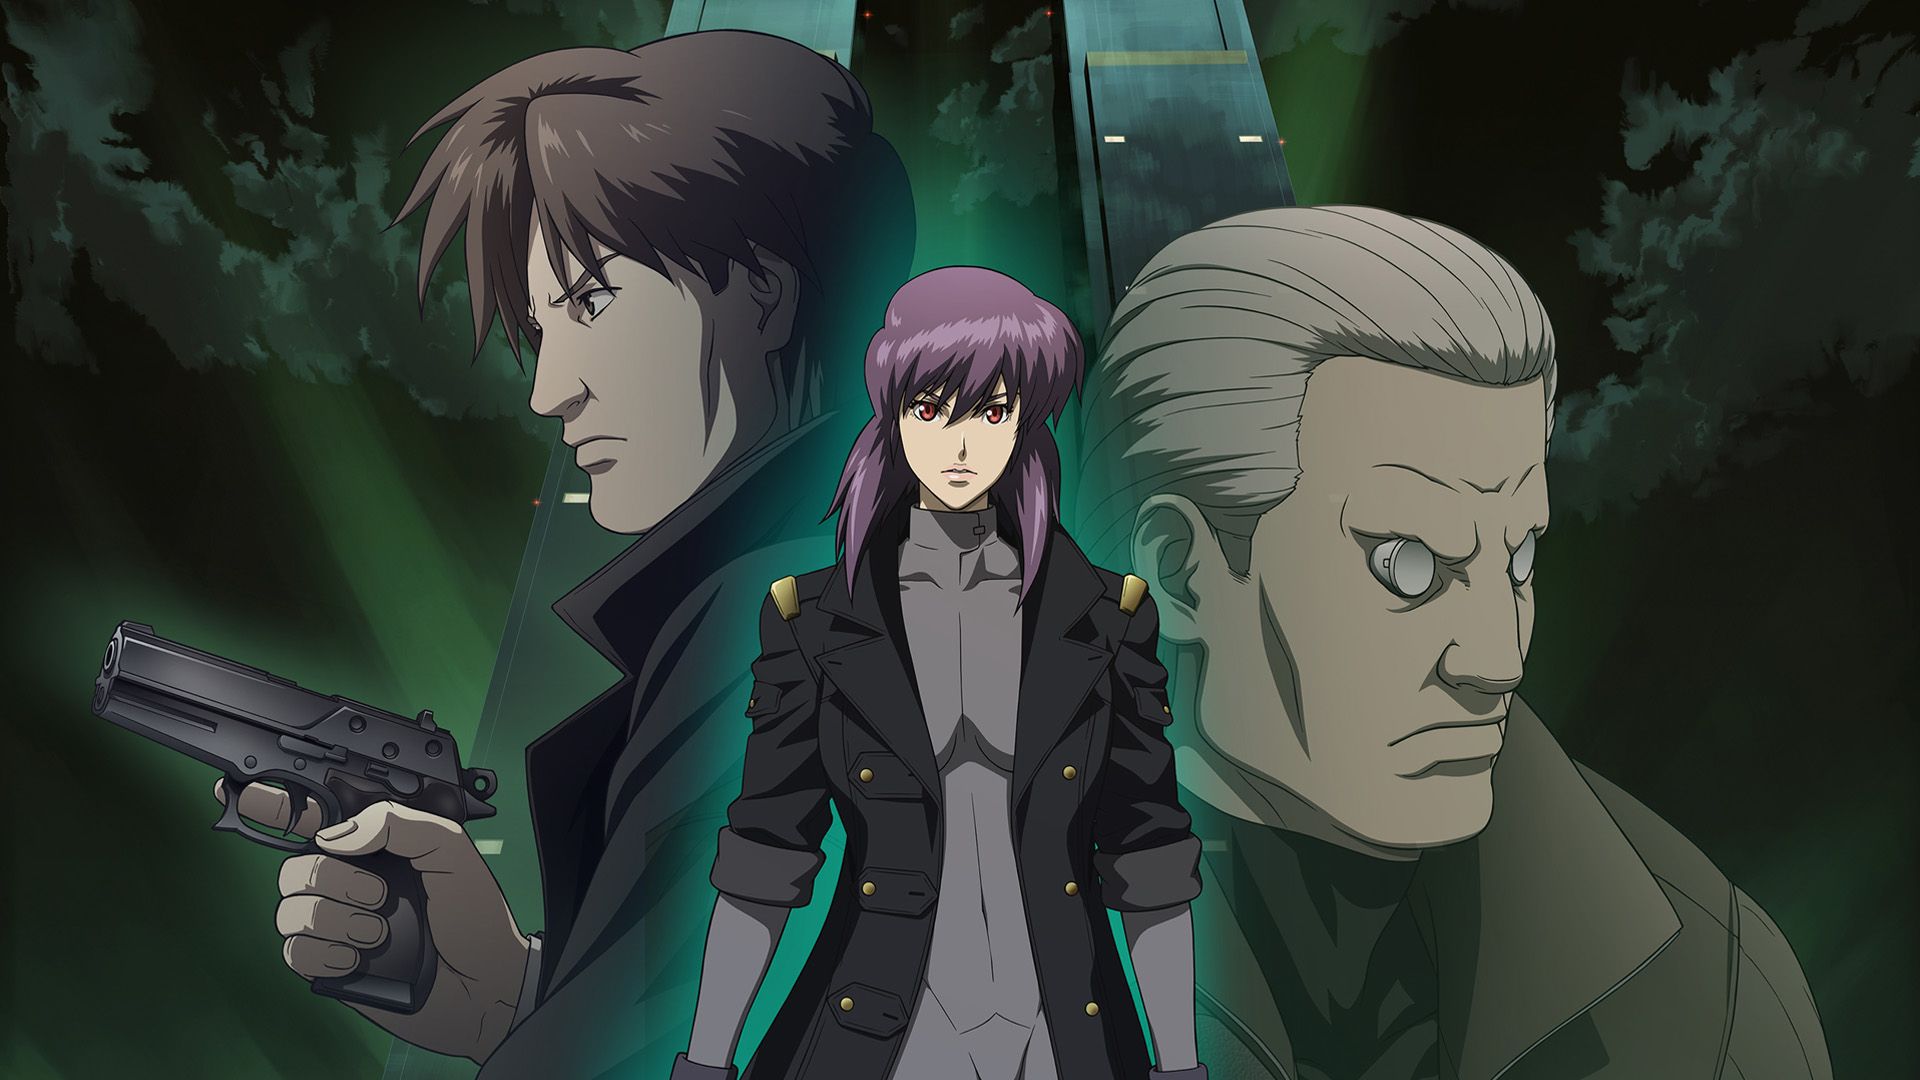 Desktop Wallpaper Ghost In The Shell: Stand Alone Complex, Anime, Hd Image, Picture, Background ...